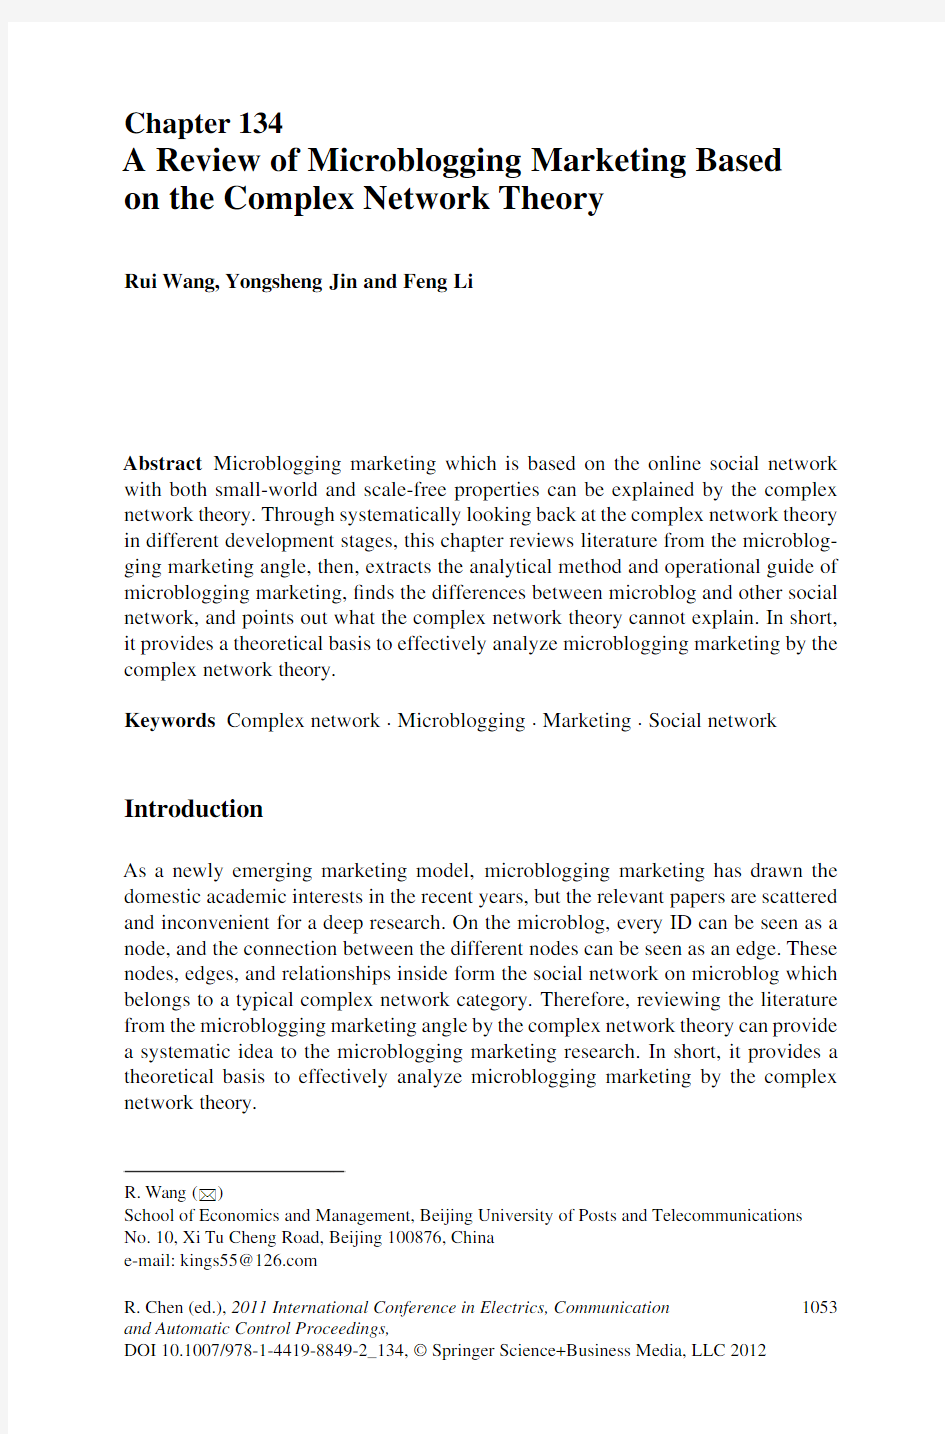 A Review of Microblogging Marketing Based on the Complex Network Theory